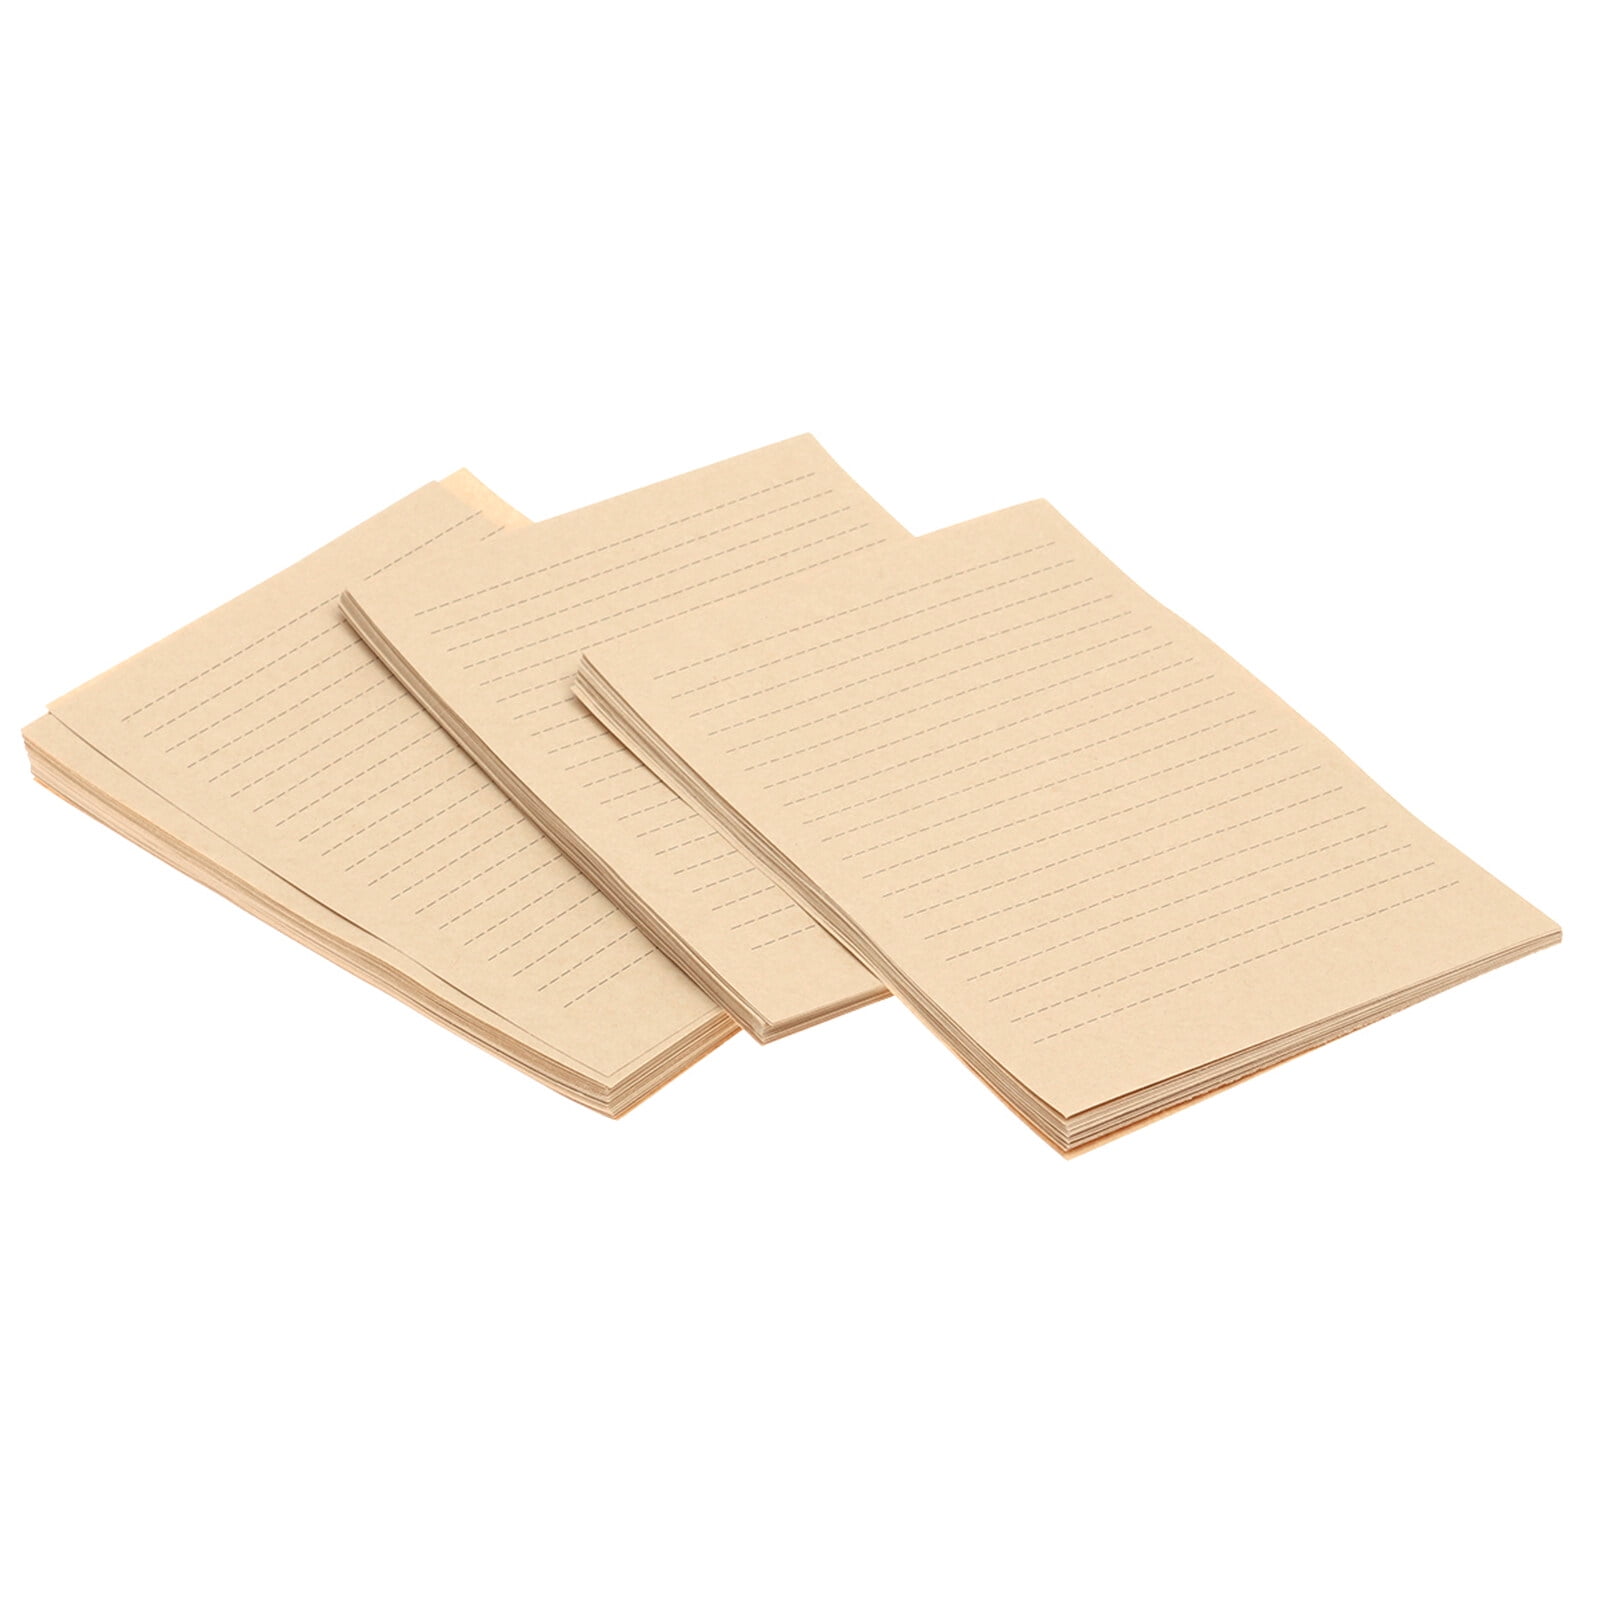 200 Pack Brown Craft Paper for DIY Projects, Classroom, Letter Size Kraft Paper Material Sheets, 130gsm (8.5 x 11 in)